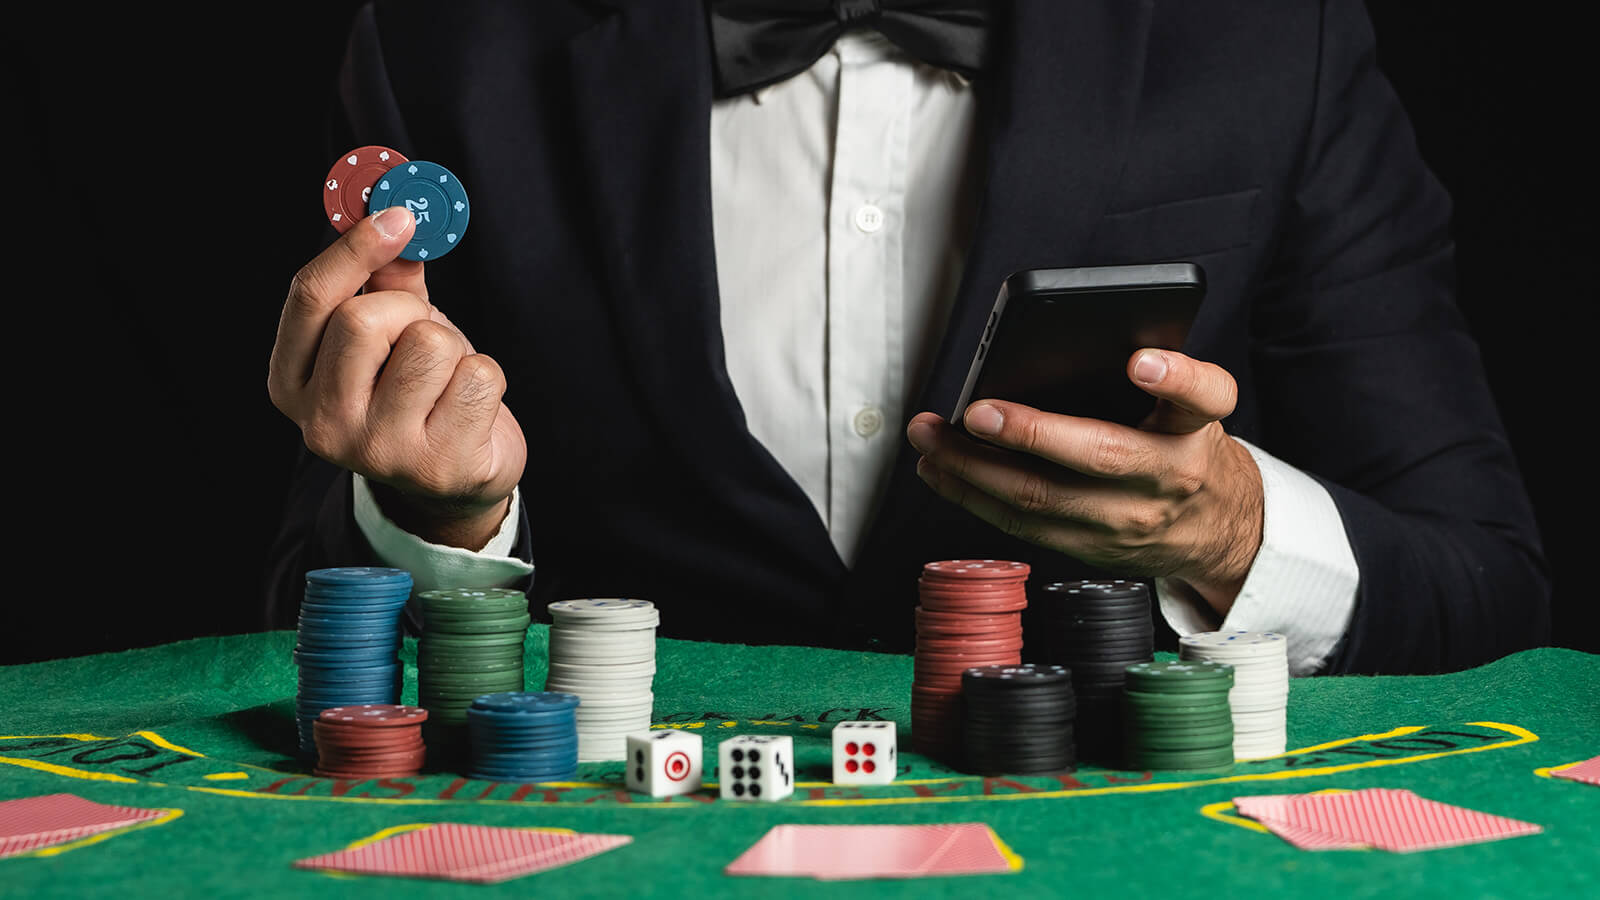 Which Are Better Skill-Based Casino Games Or Games Of Chance